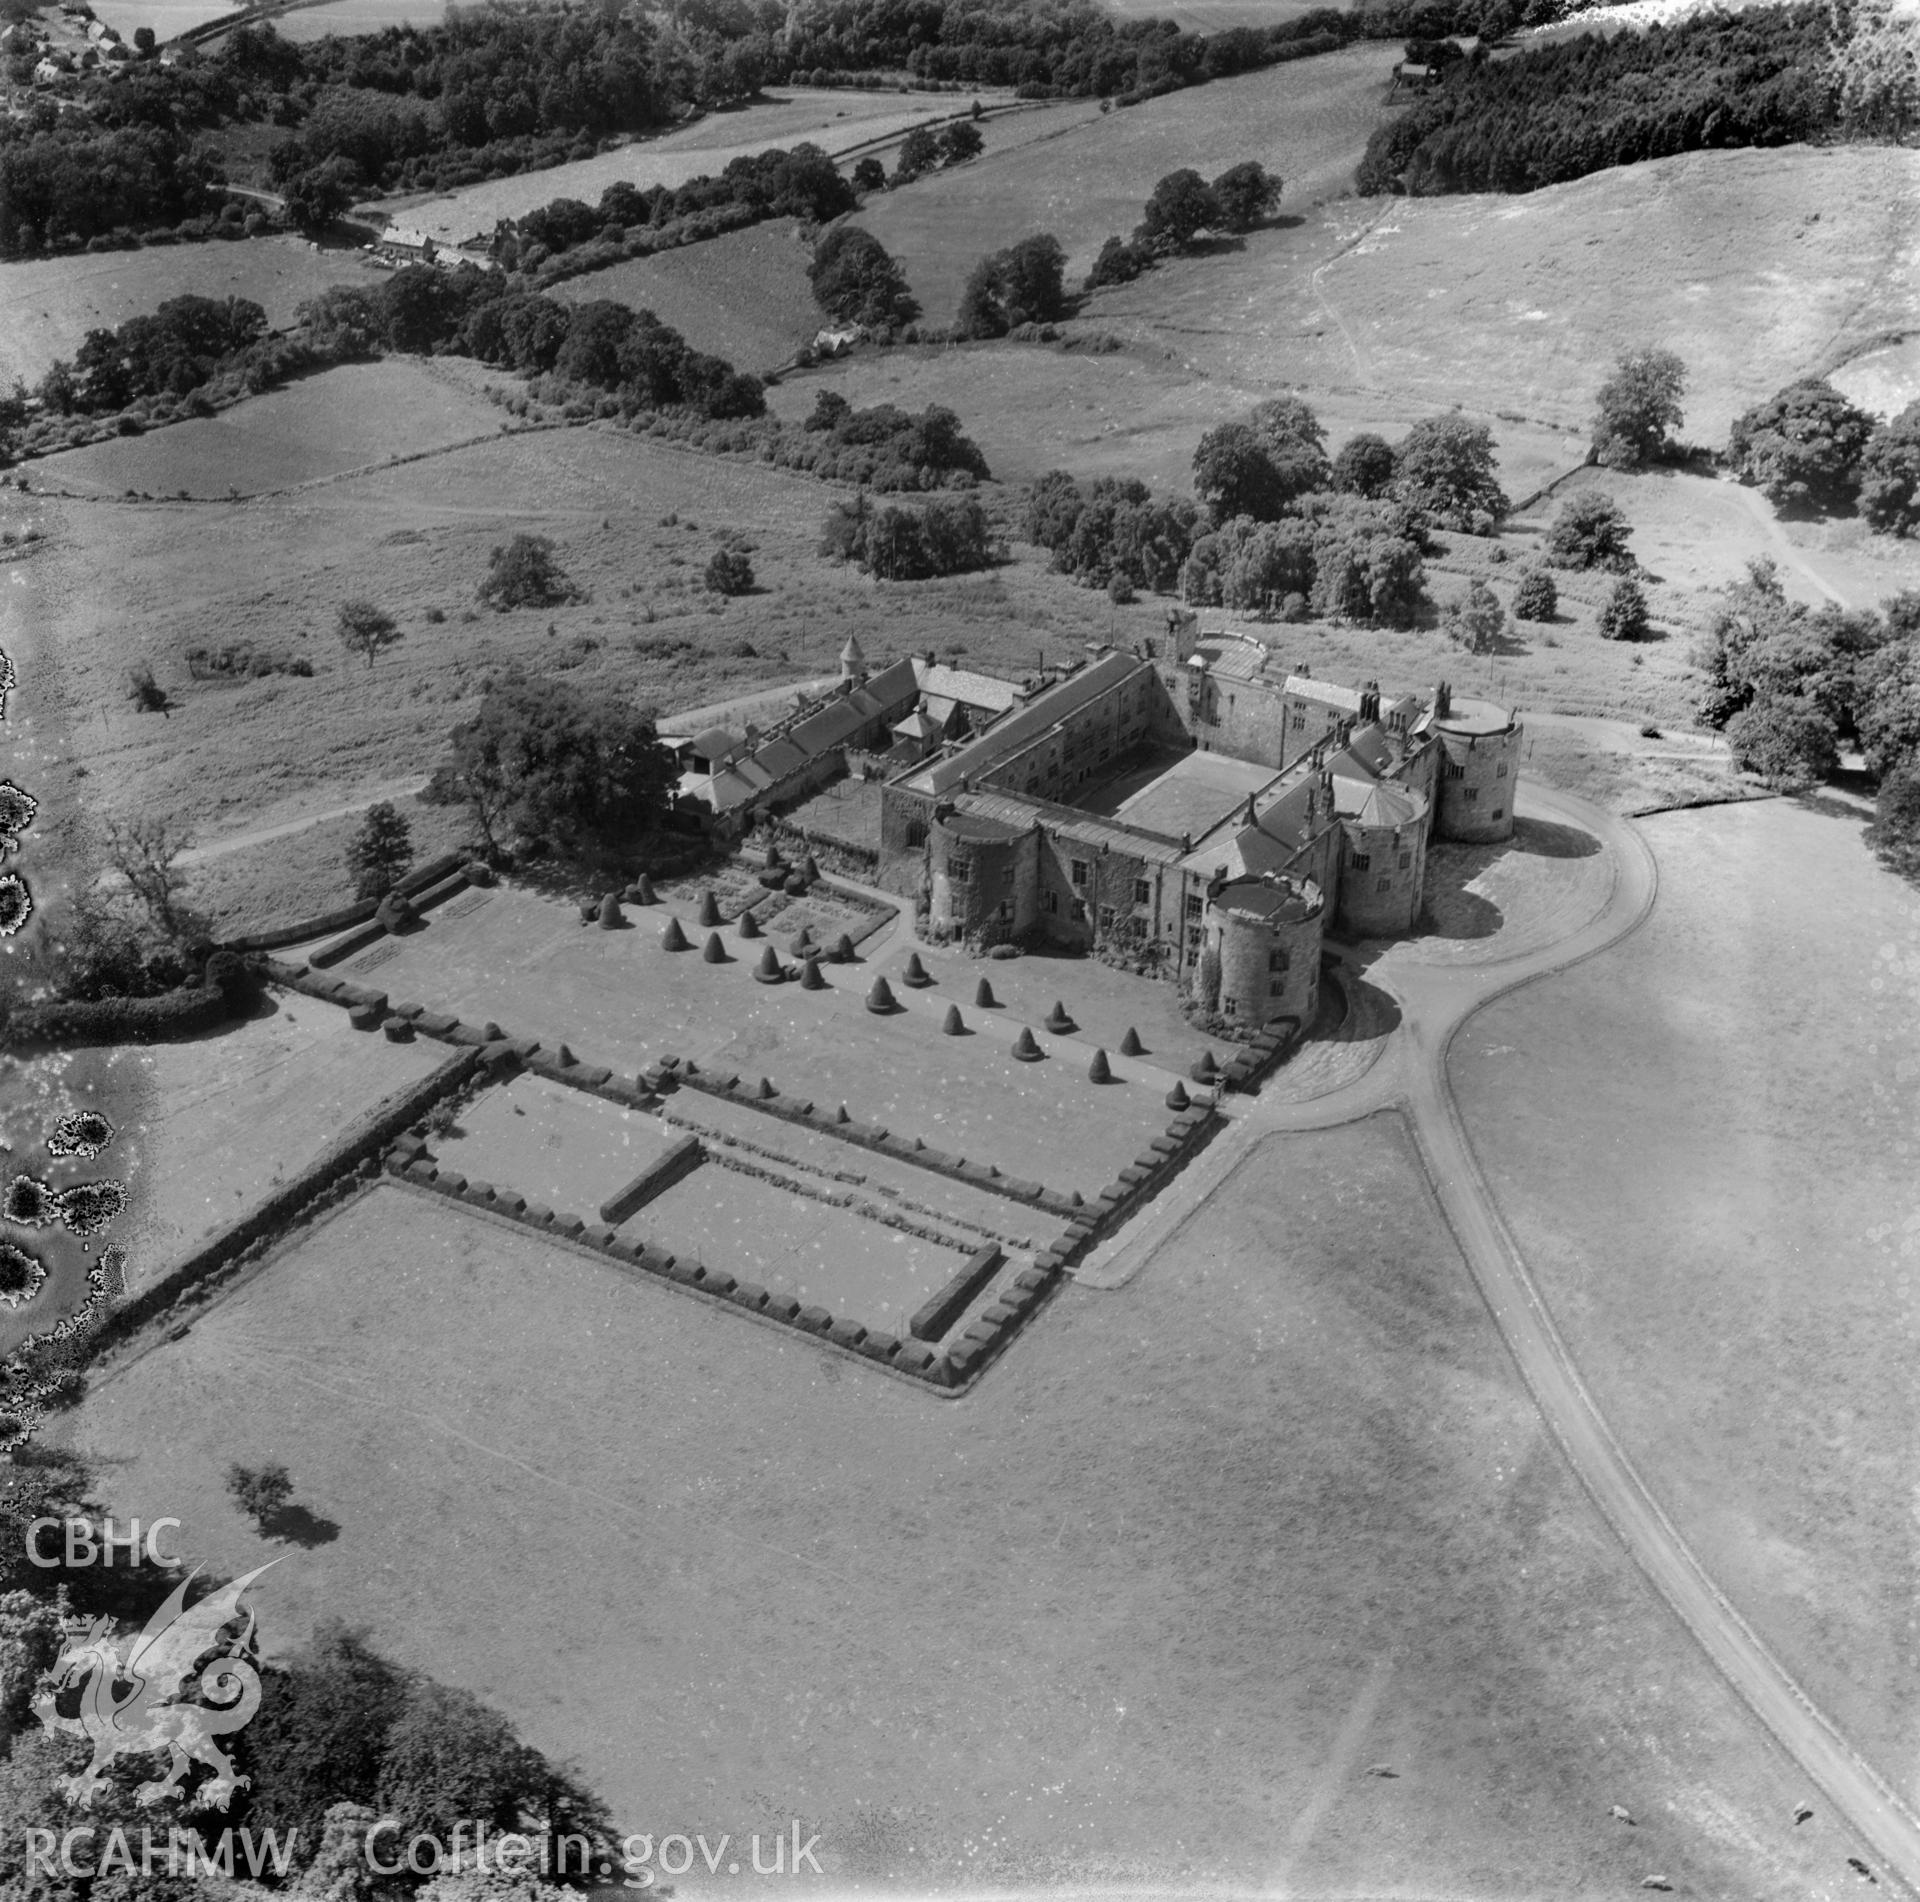 View of Chirk Castle